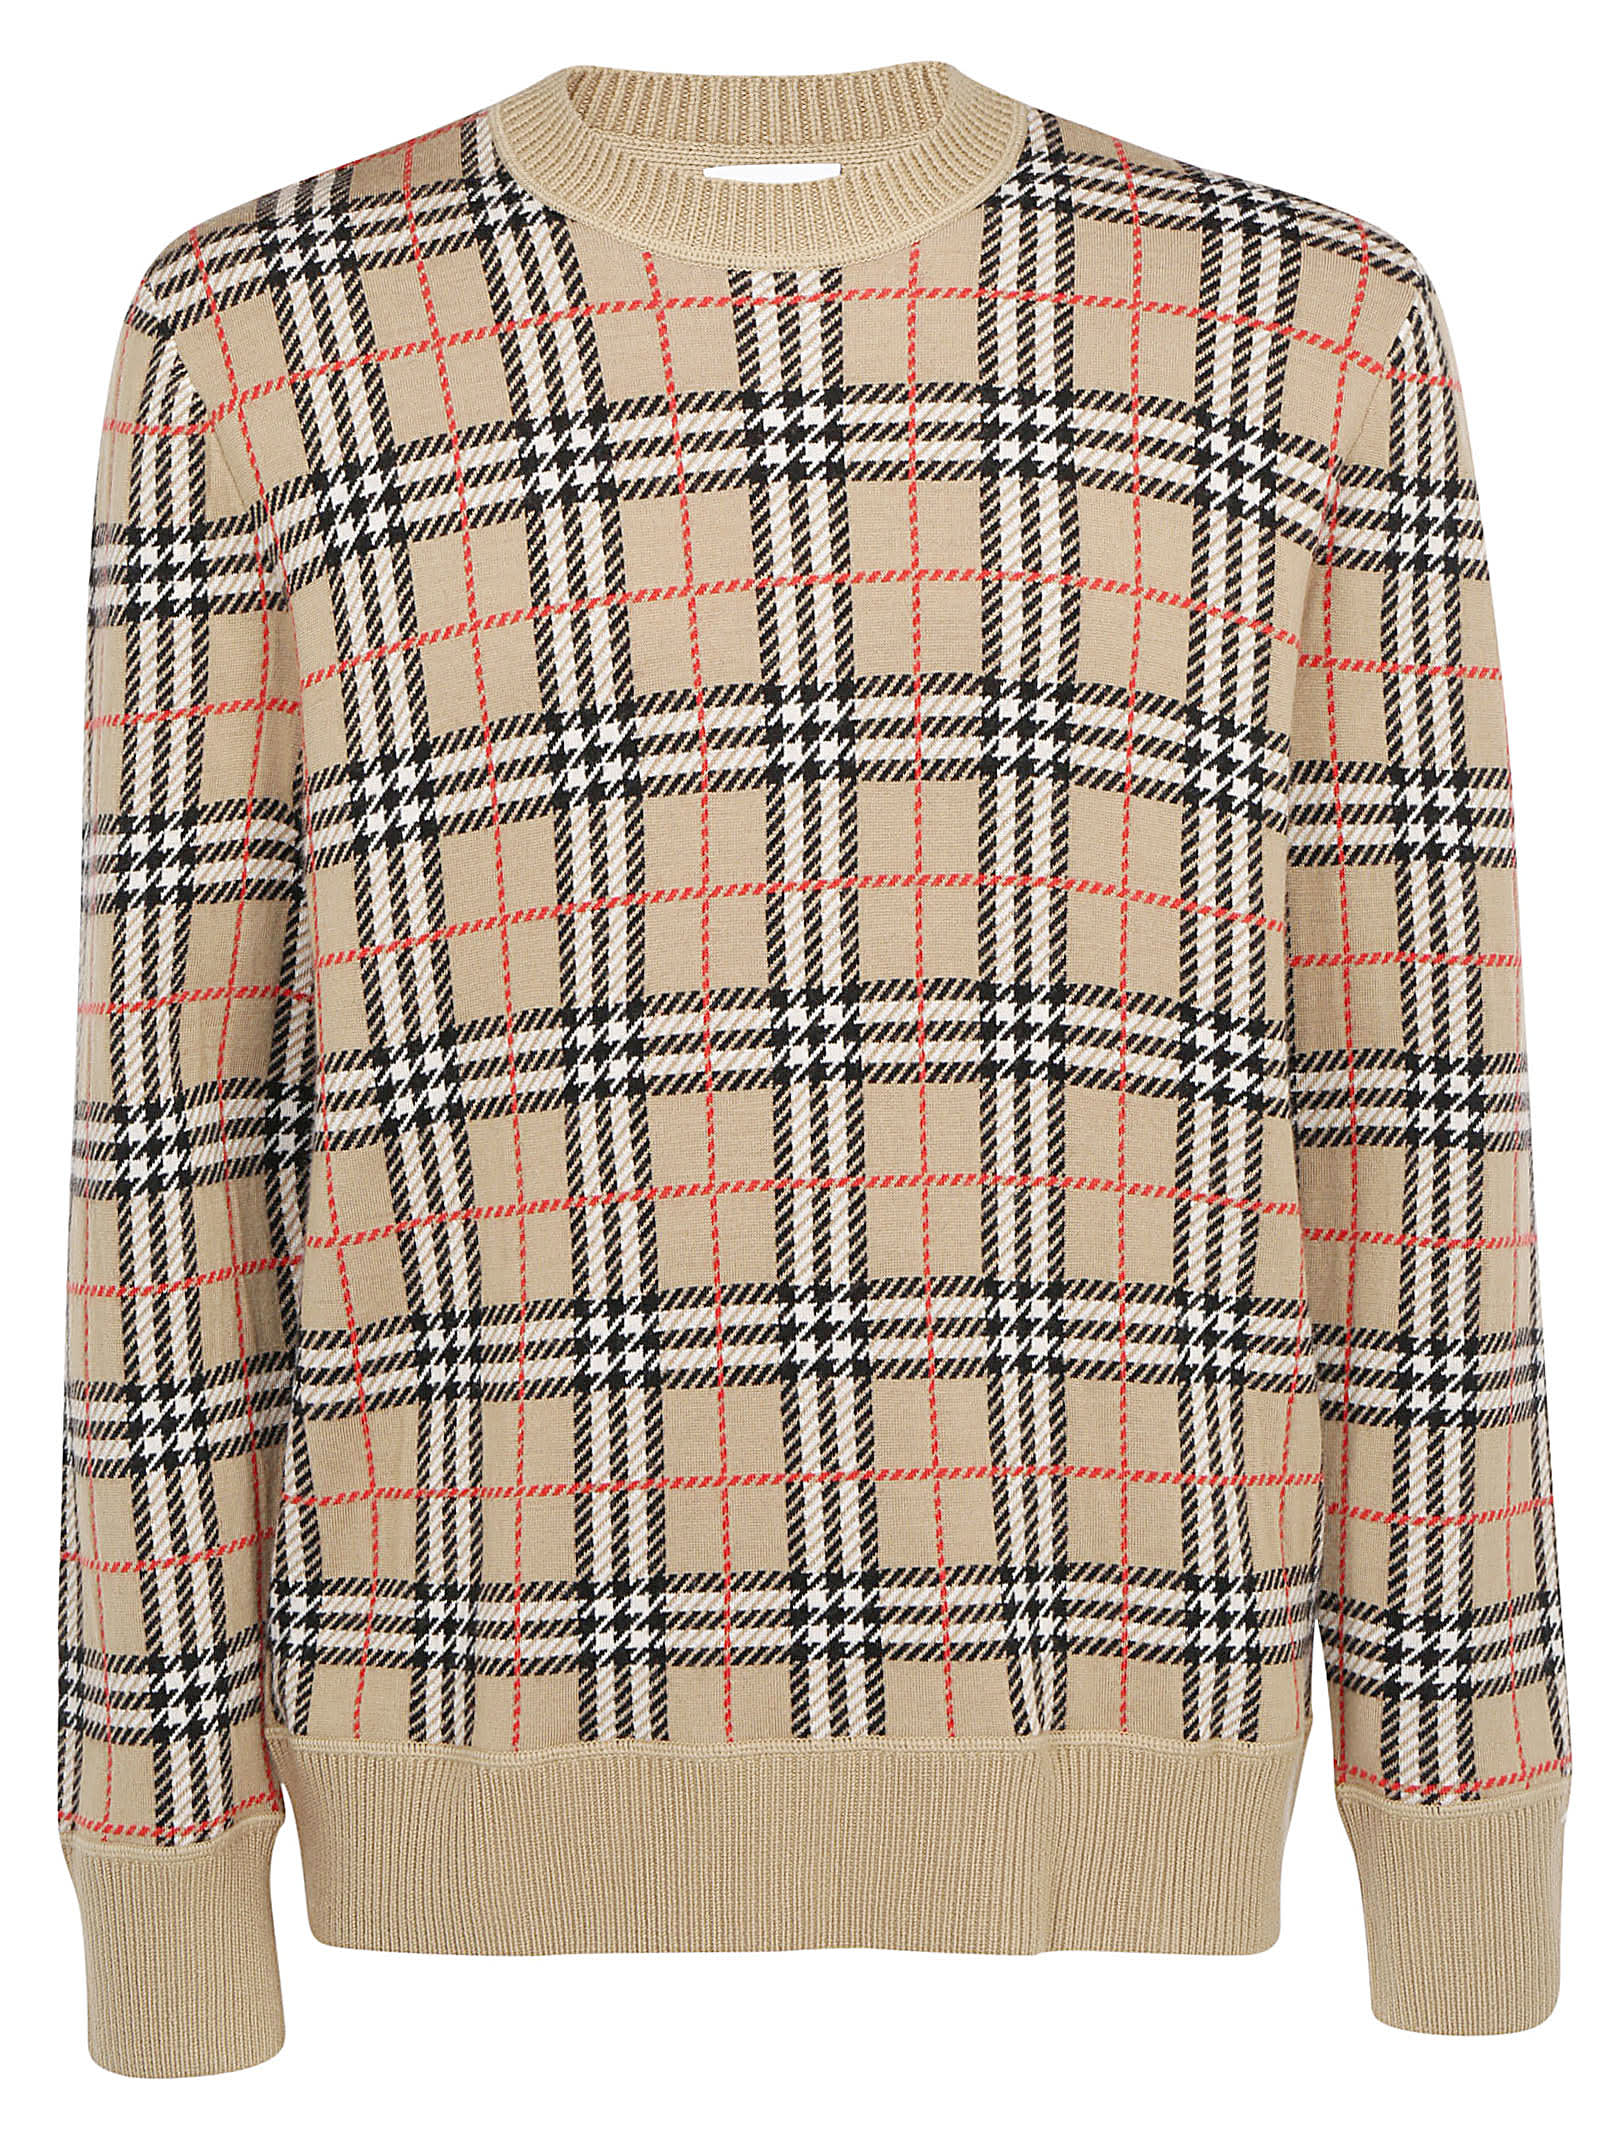 burberry sweater for sale